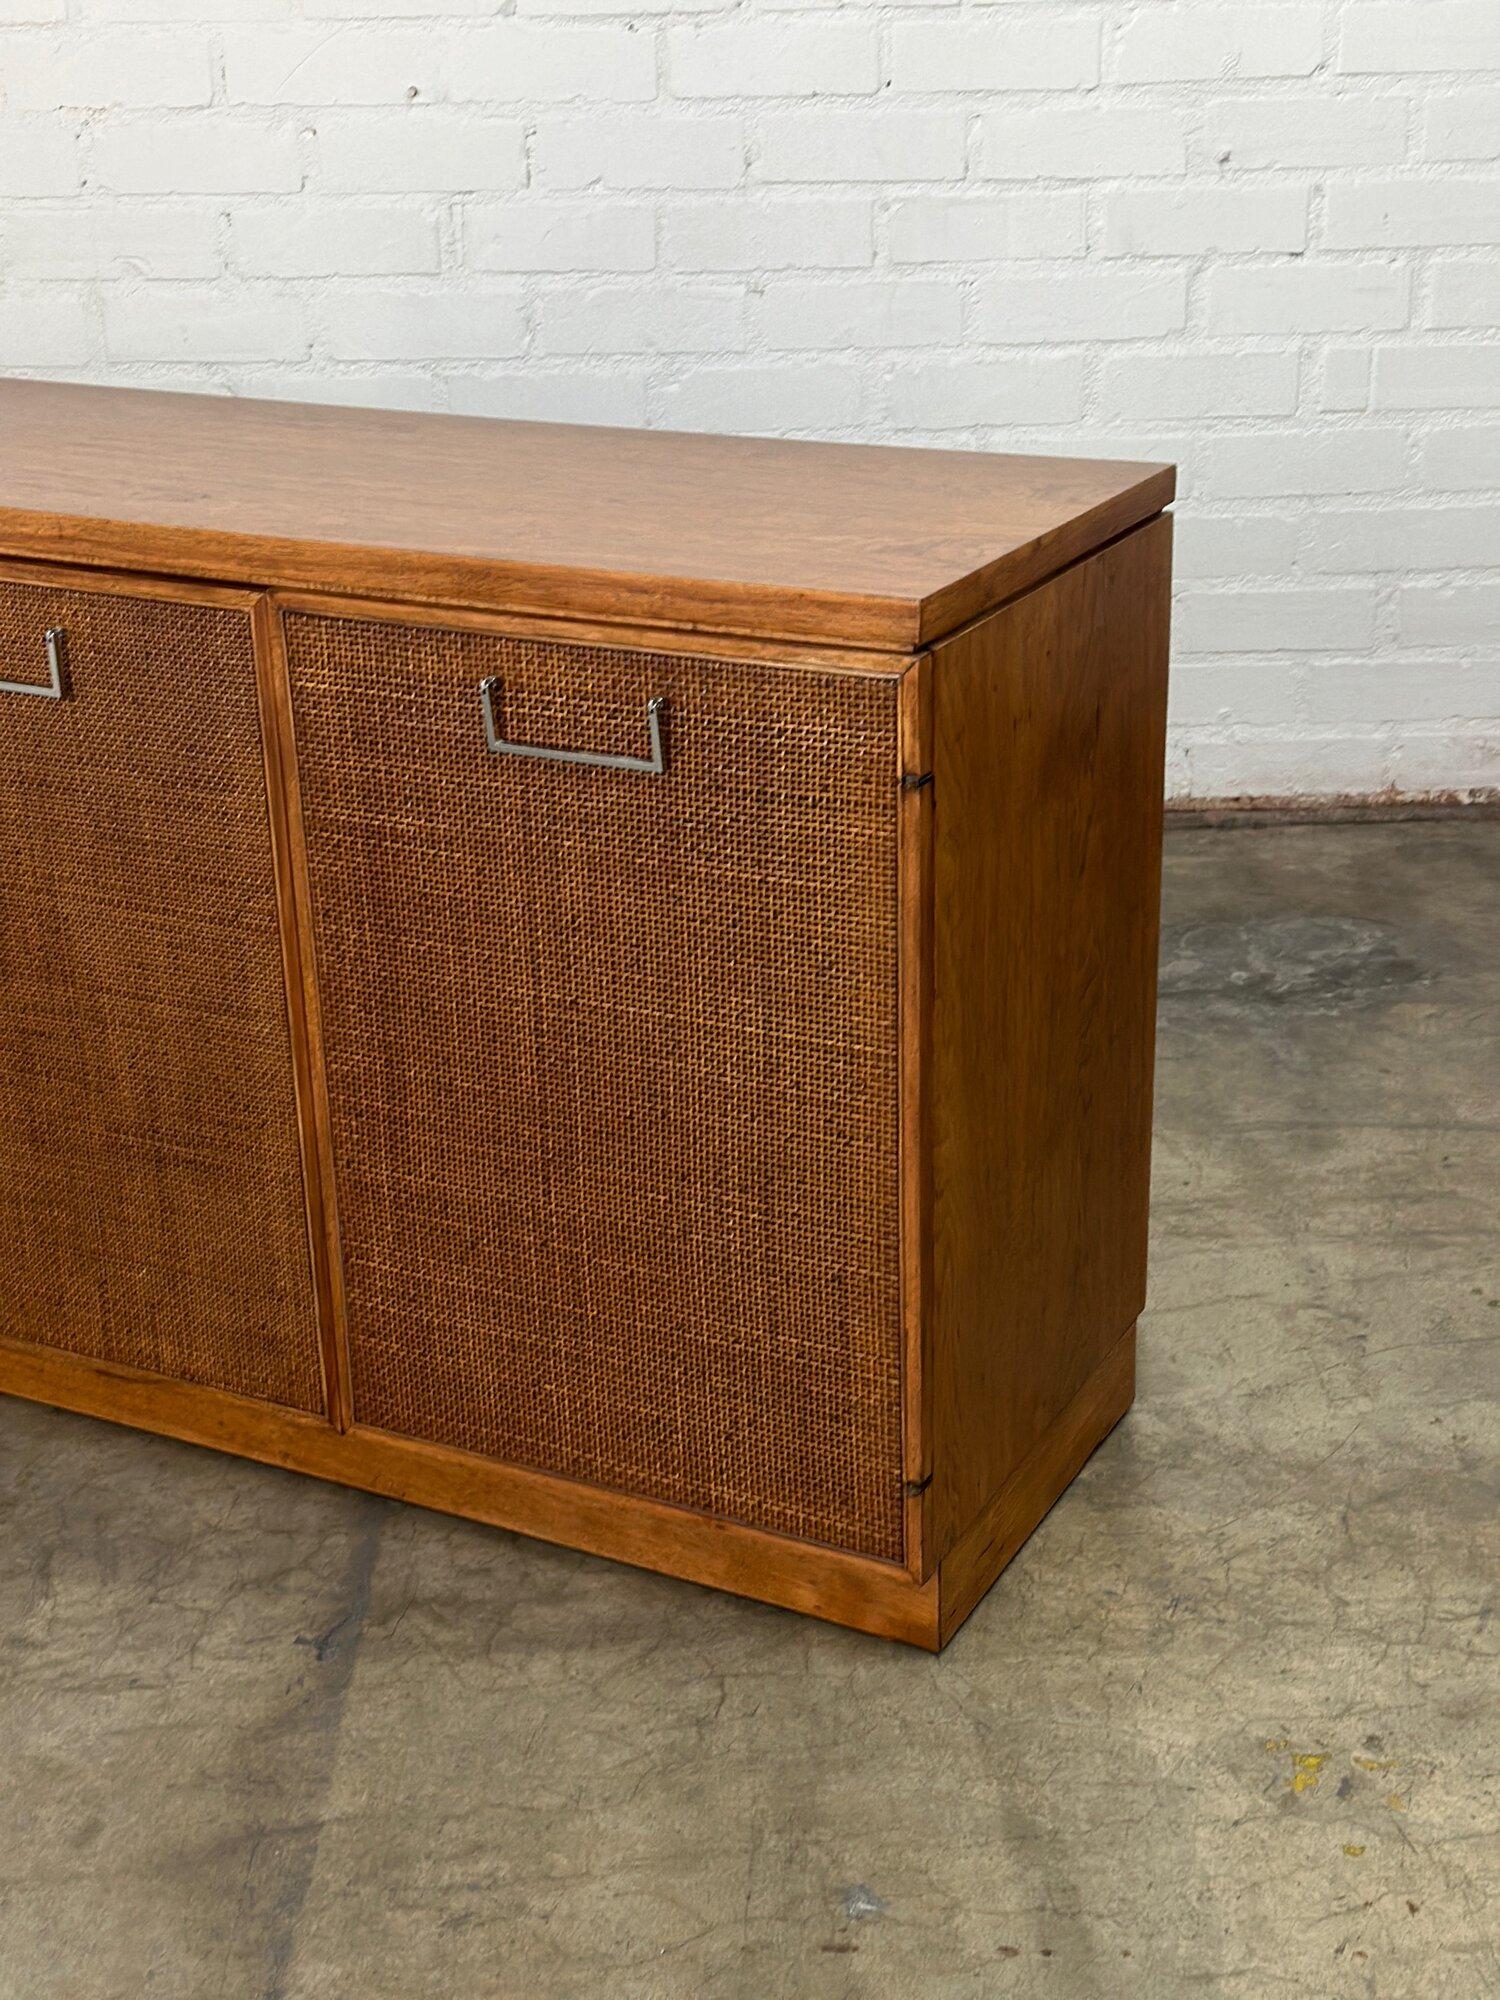 W78 D18 H31

Fully restored credenza in excellent condition by Founders Furniture Company a subsidiary of Knoll. Item is structurally sound and fully functional. Credenza features original cane in great shape with no visible breaks. Item has